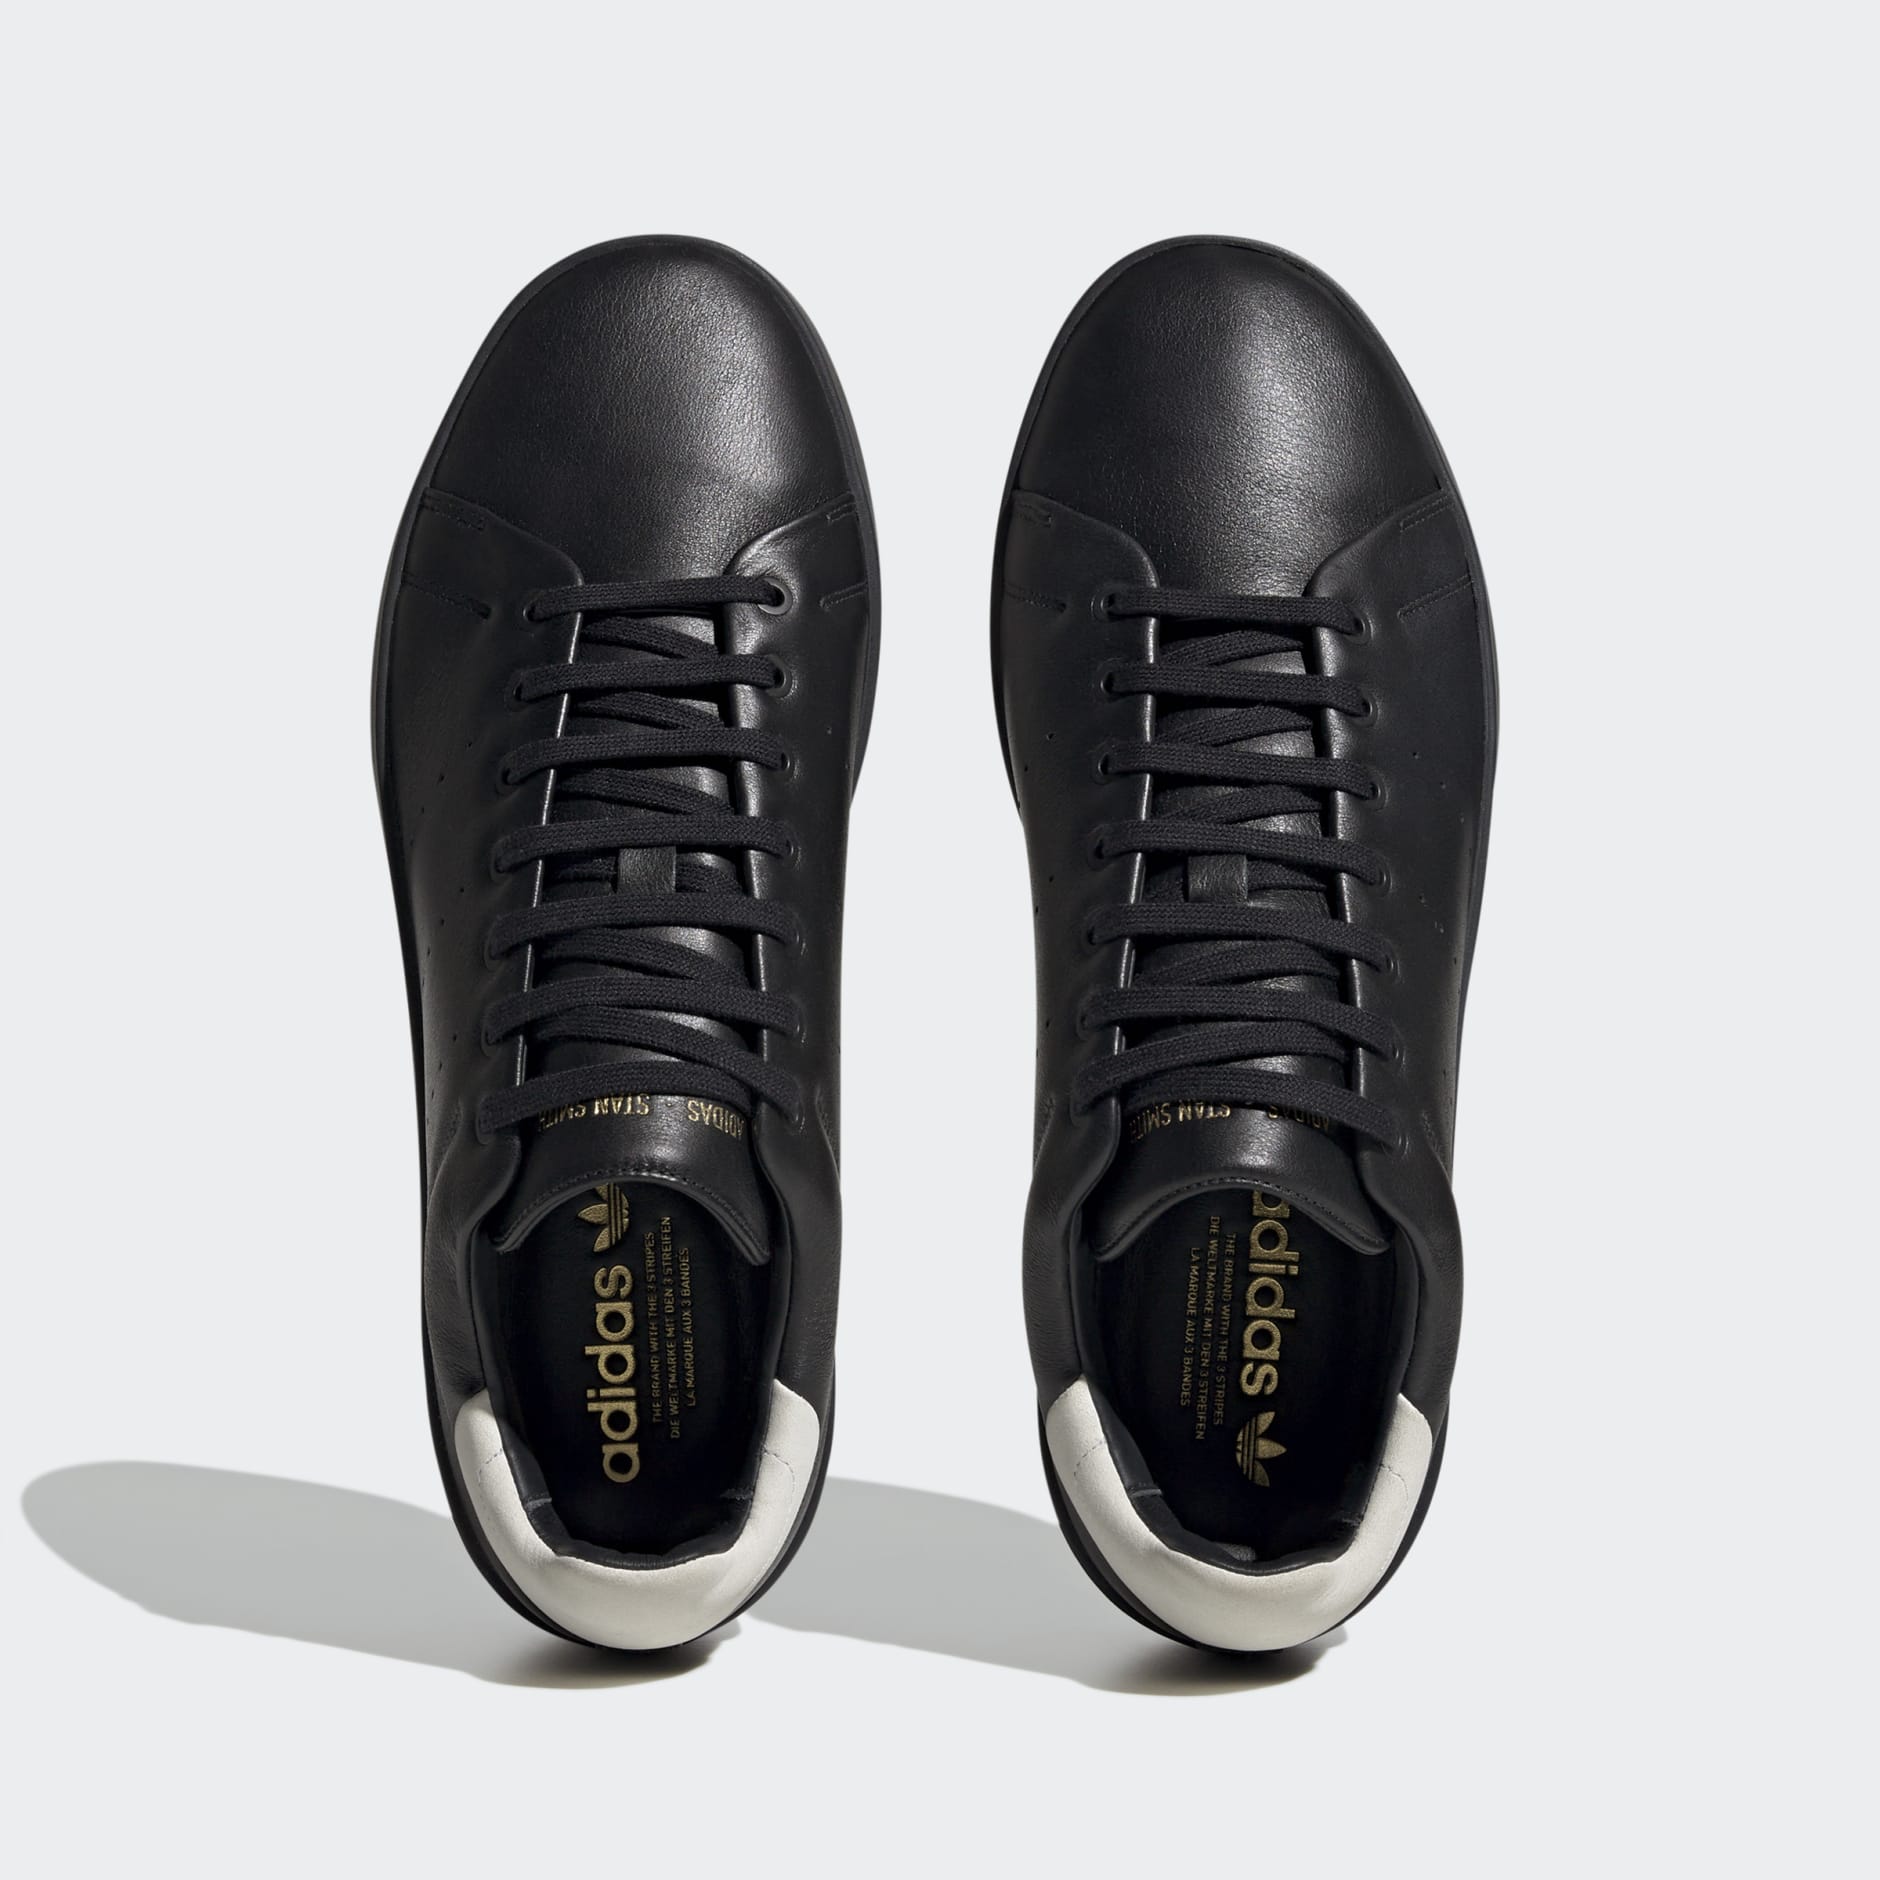 Shoes - Stan Smith Recon Shoes - Black | adidas South Africa